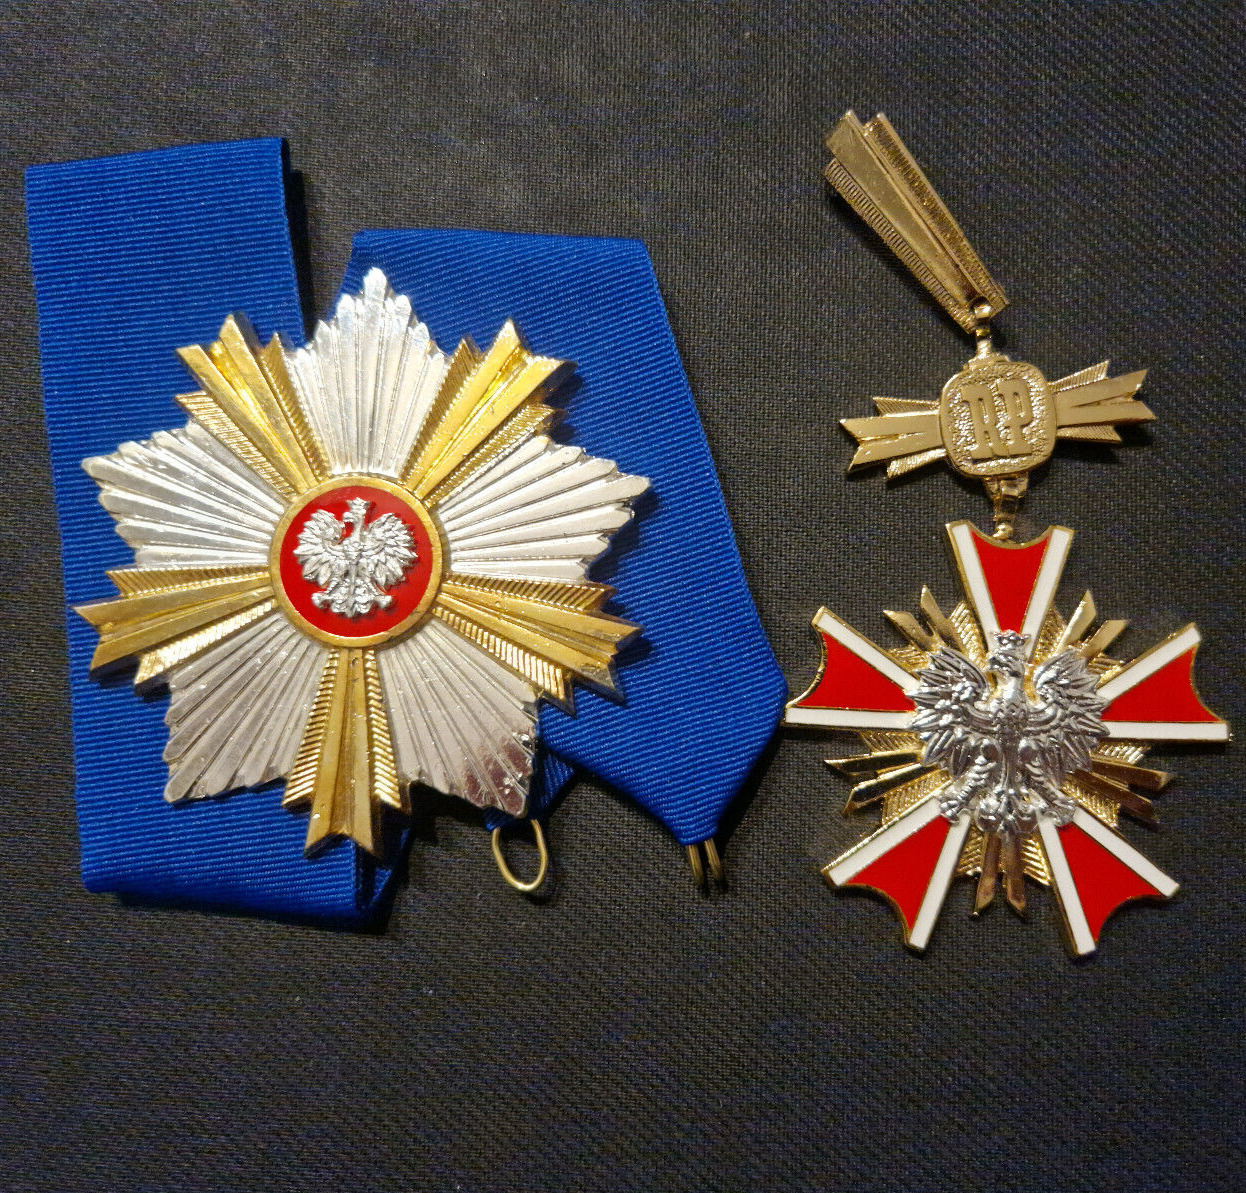 3149 THE POLISH ORDER OF MERIT + GREAT STAR OF THE REPUBLIC OF POLAND 2ND CLASS